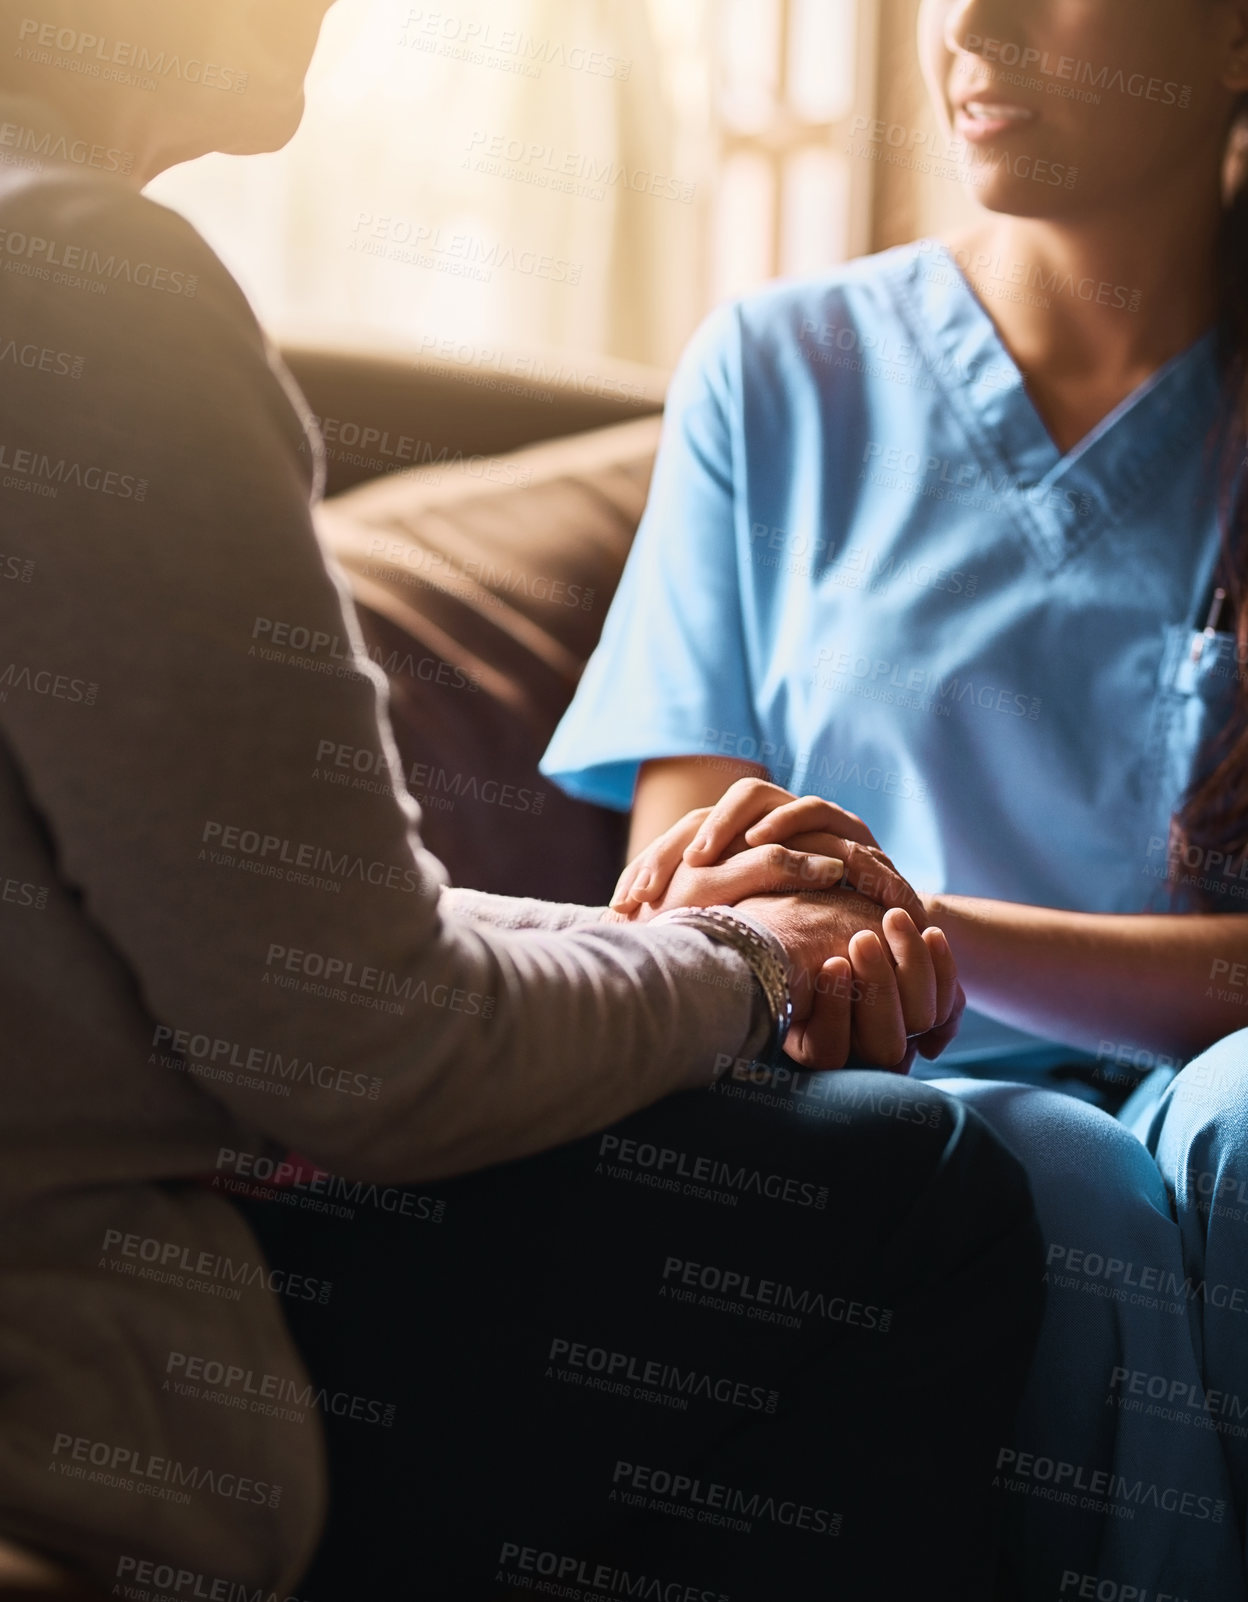 Buy stock photo Cropped shot of a nurse holding a senior woman's hands in comfort